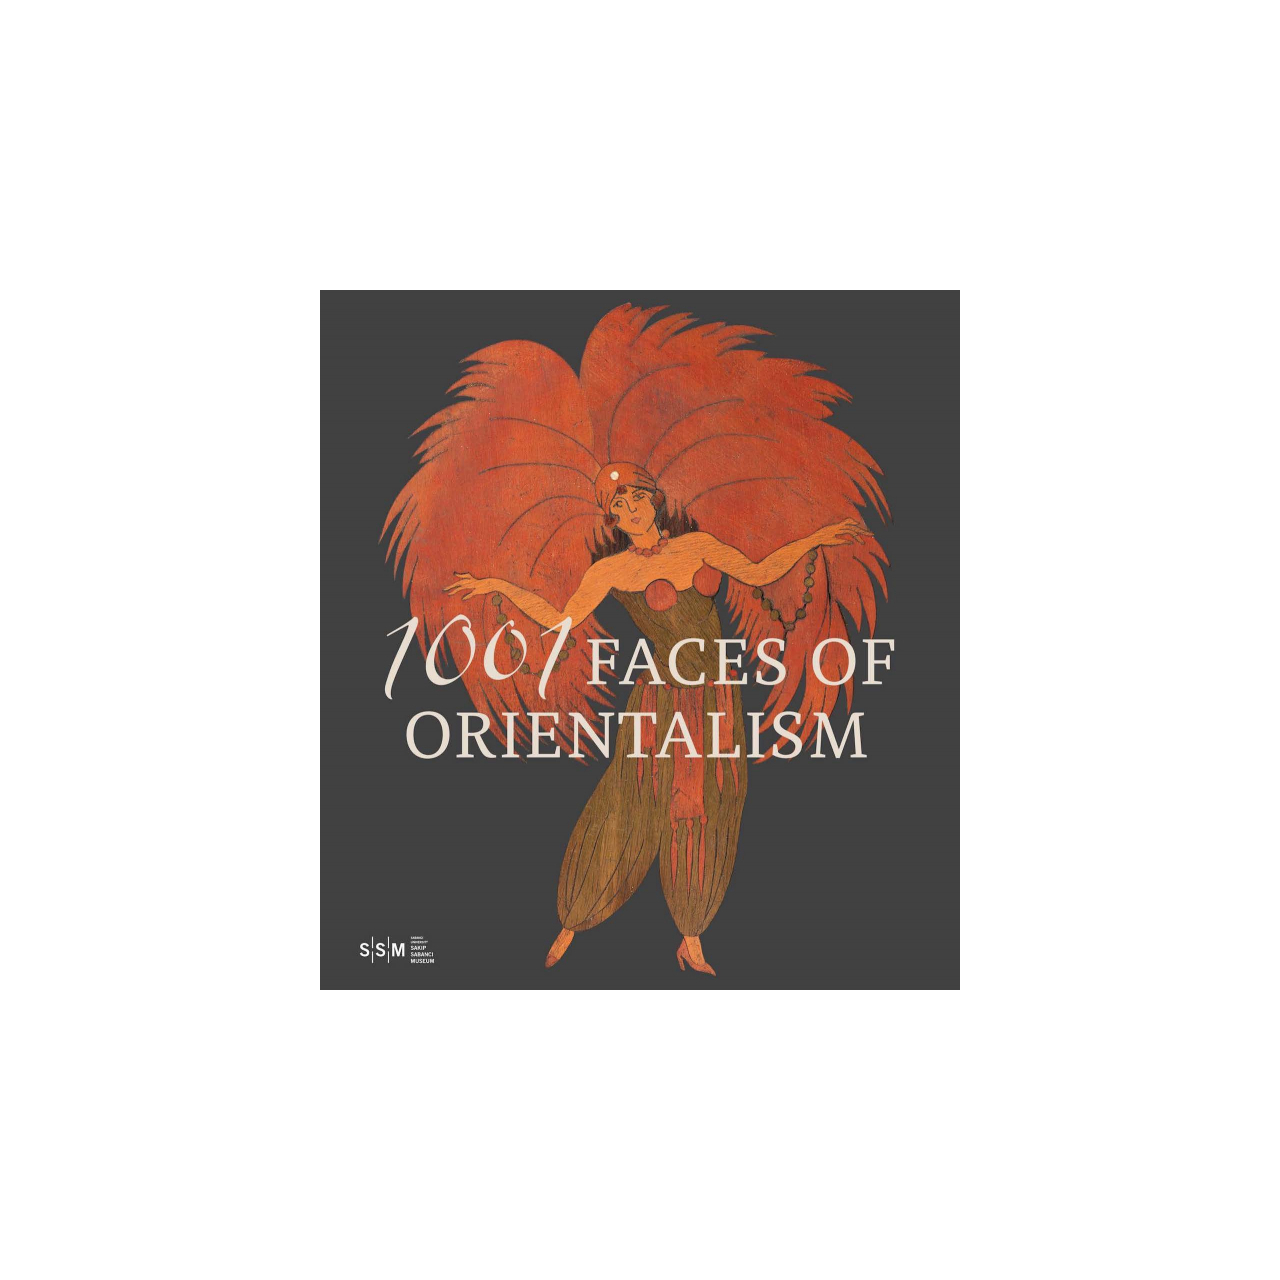 The 1001 Faces of Orientalism